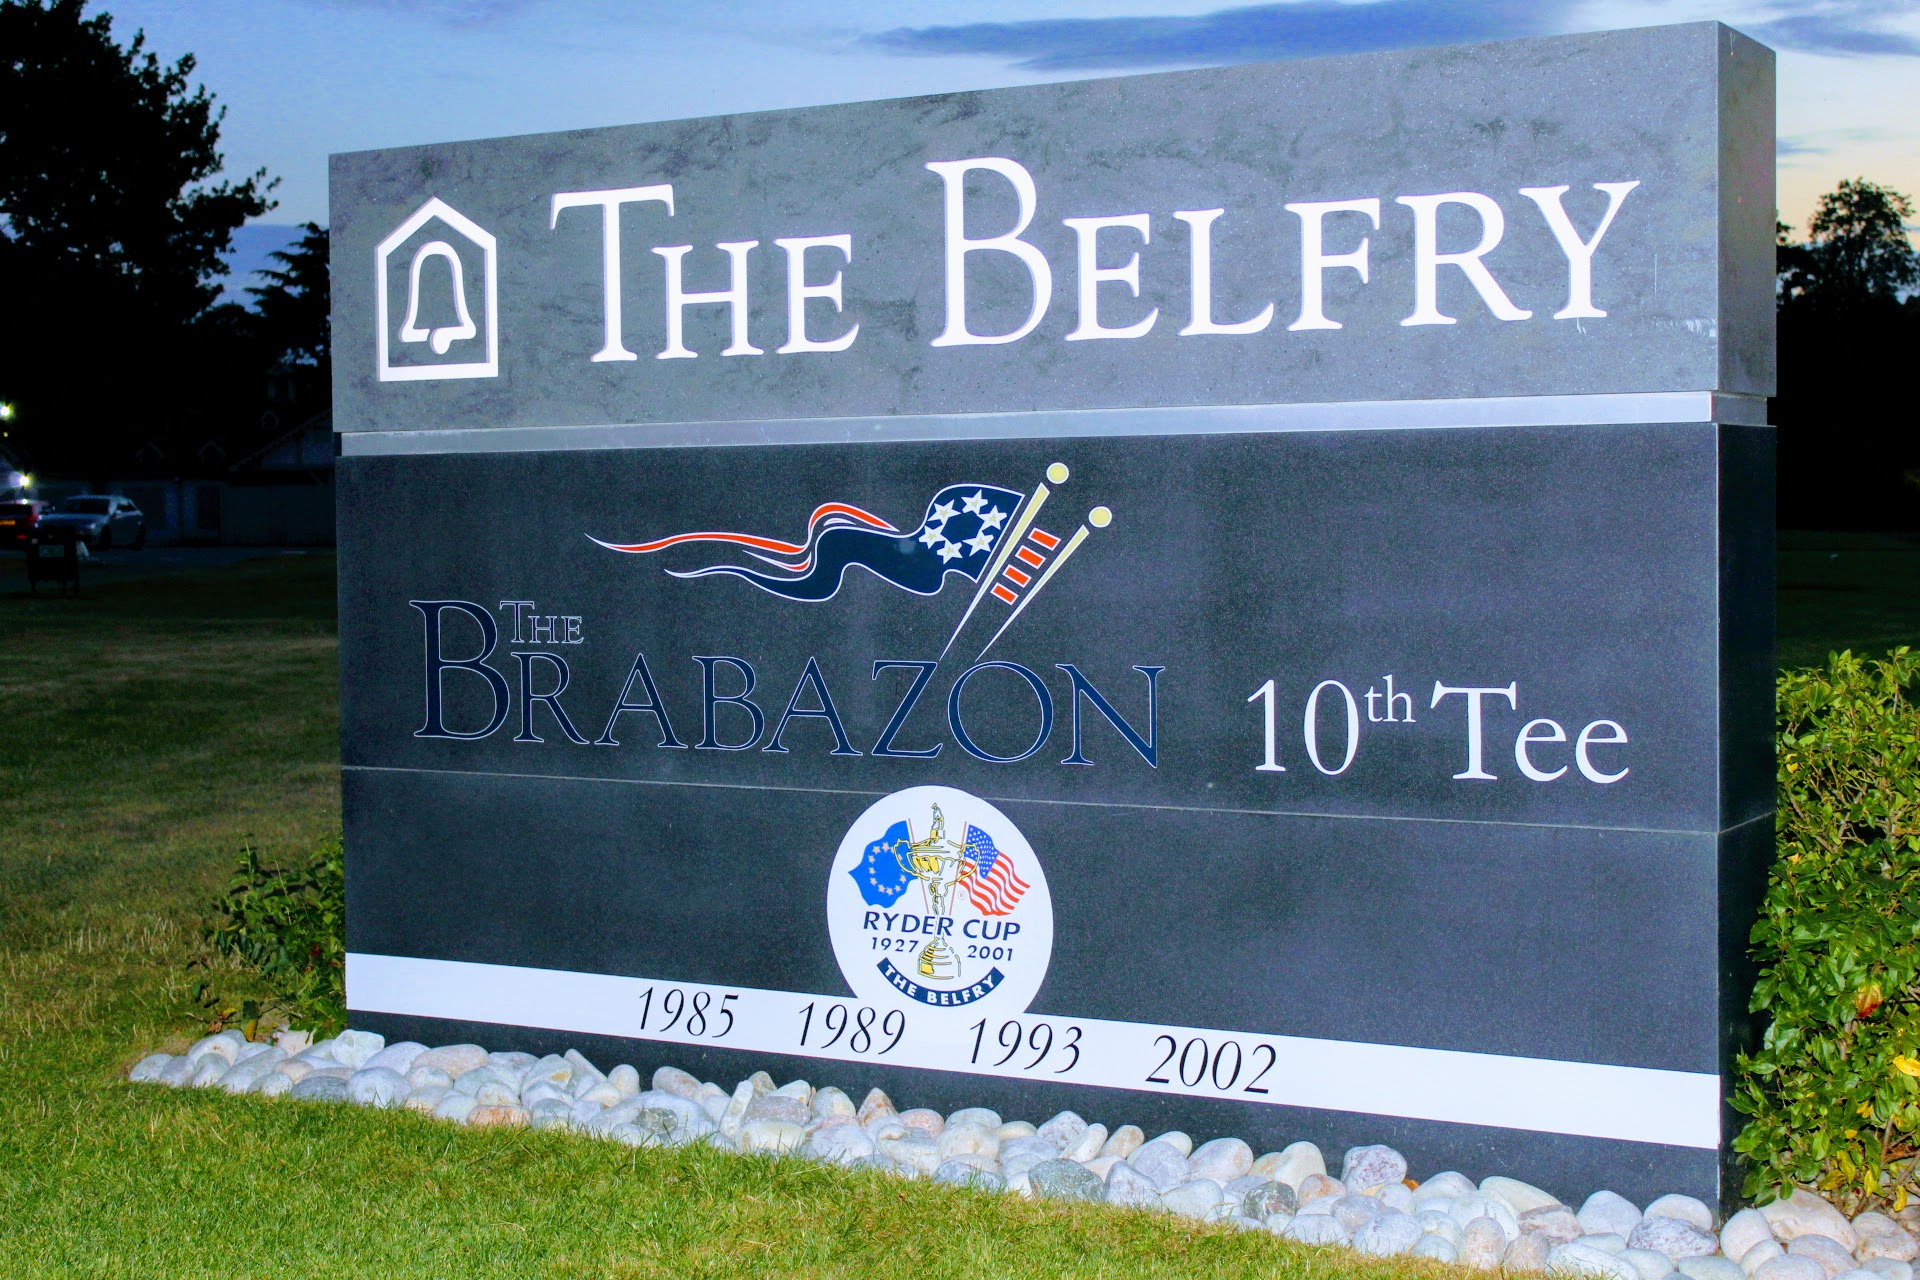 The Belfry - Golf in UK - Golf Tour Experience -